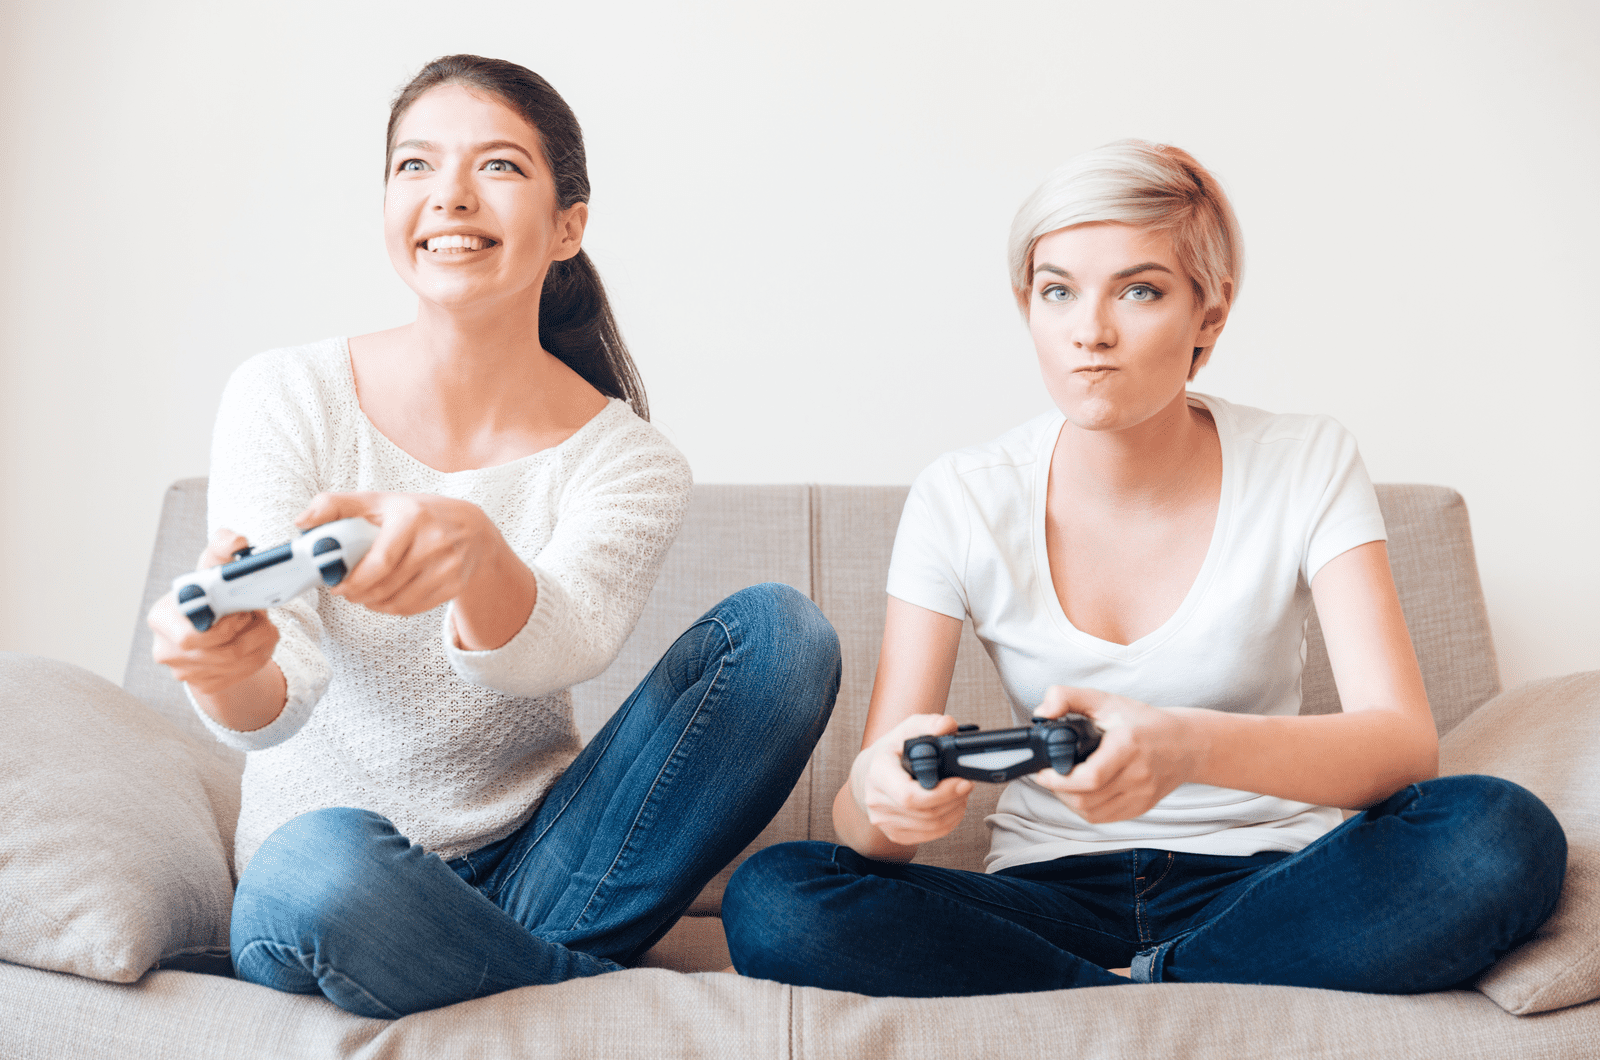 Two girlfriends playing video games